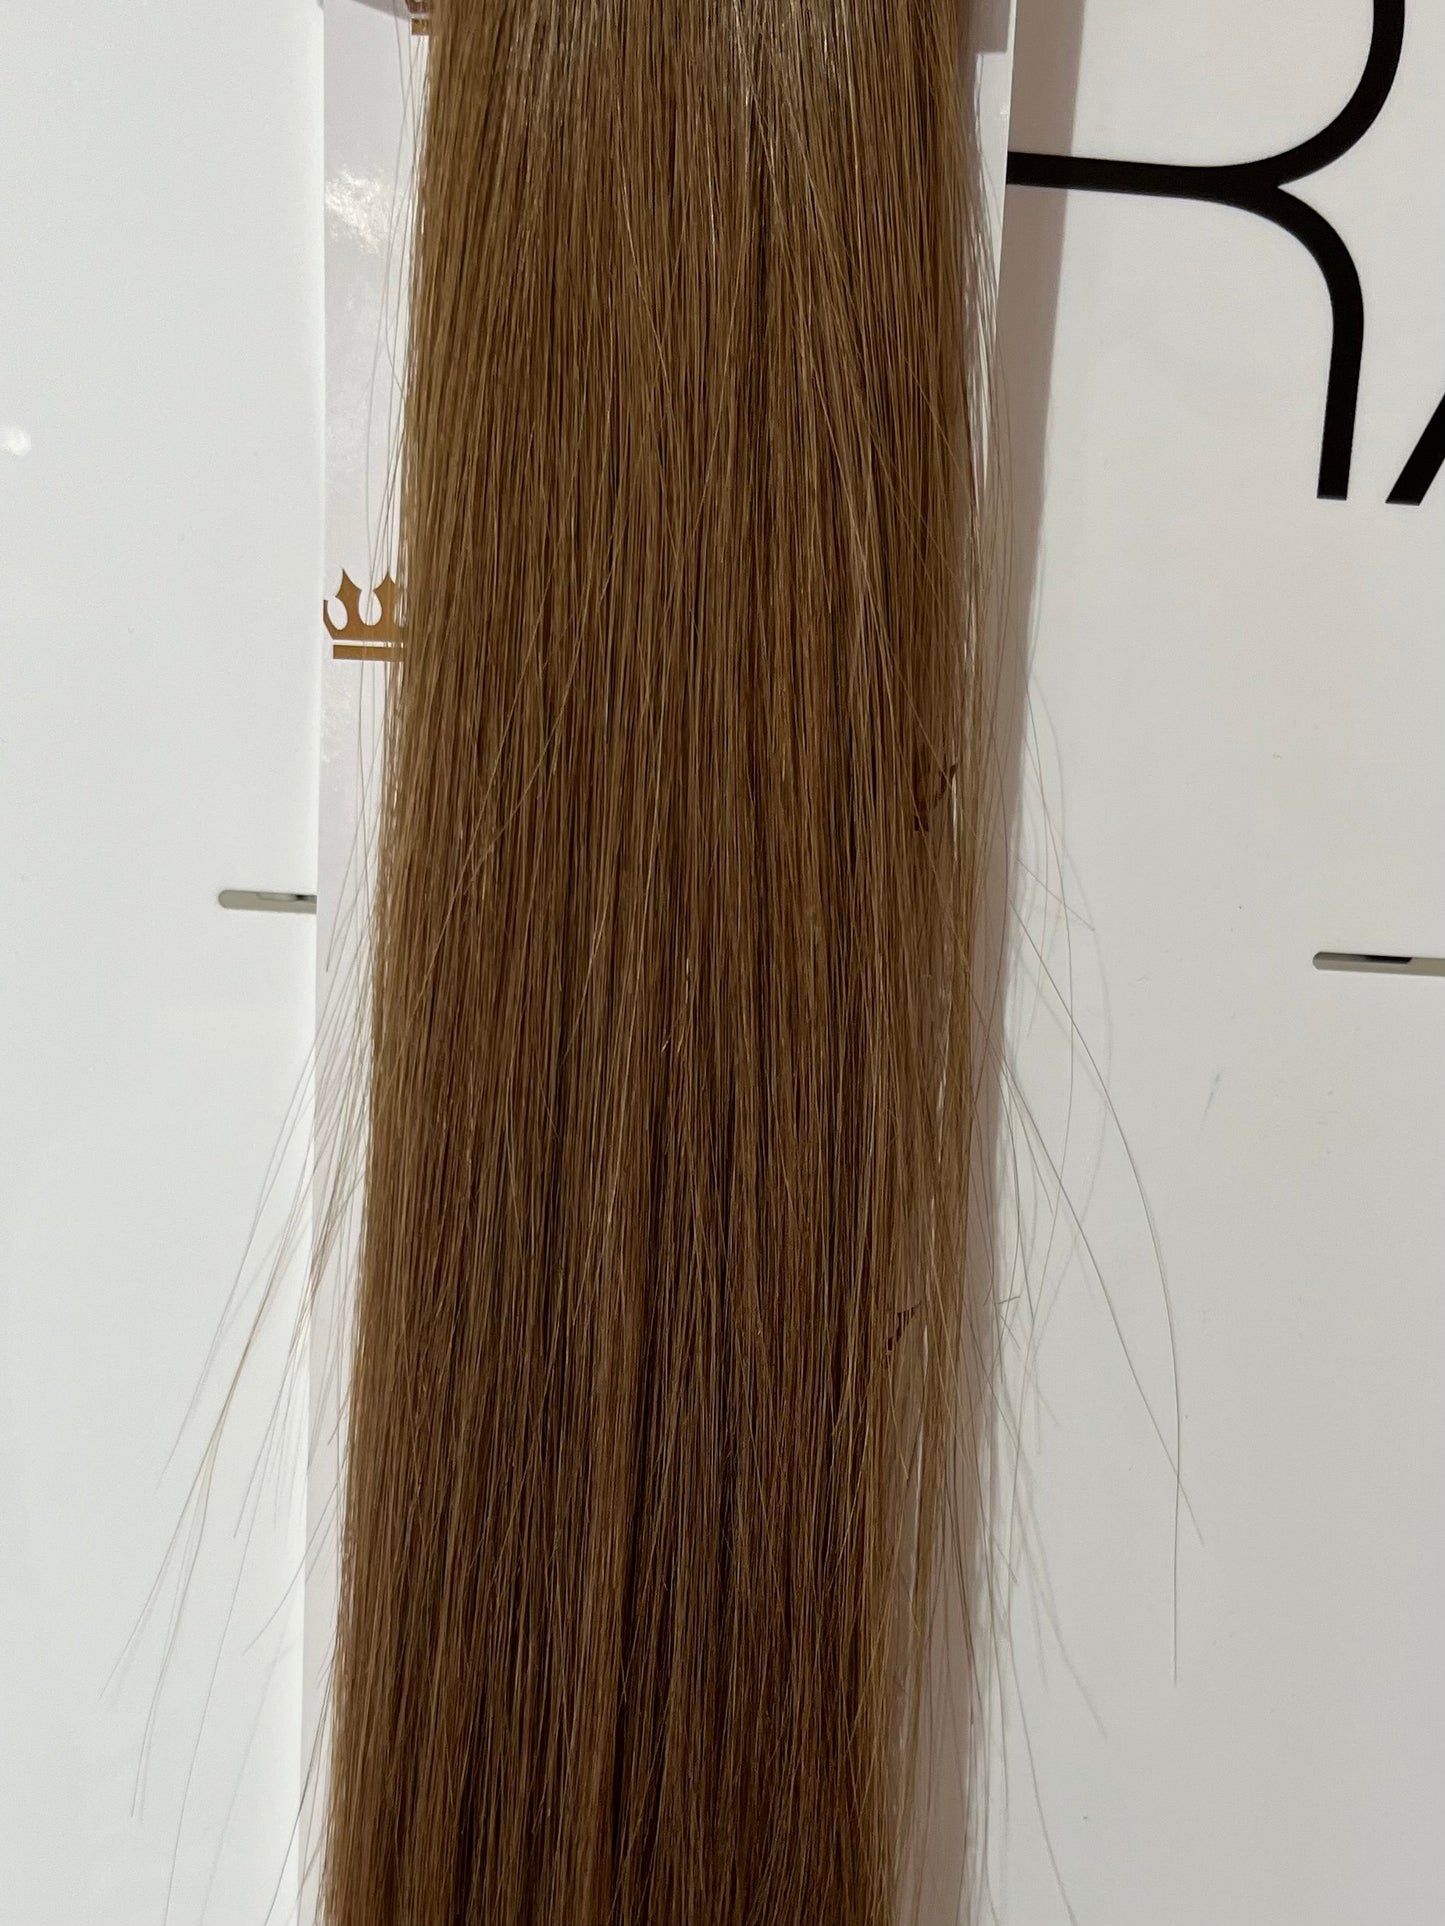 RETAIL HALO EXTENSIONS - NATURAL - LIGHT WARM BROWN